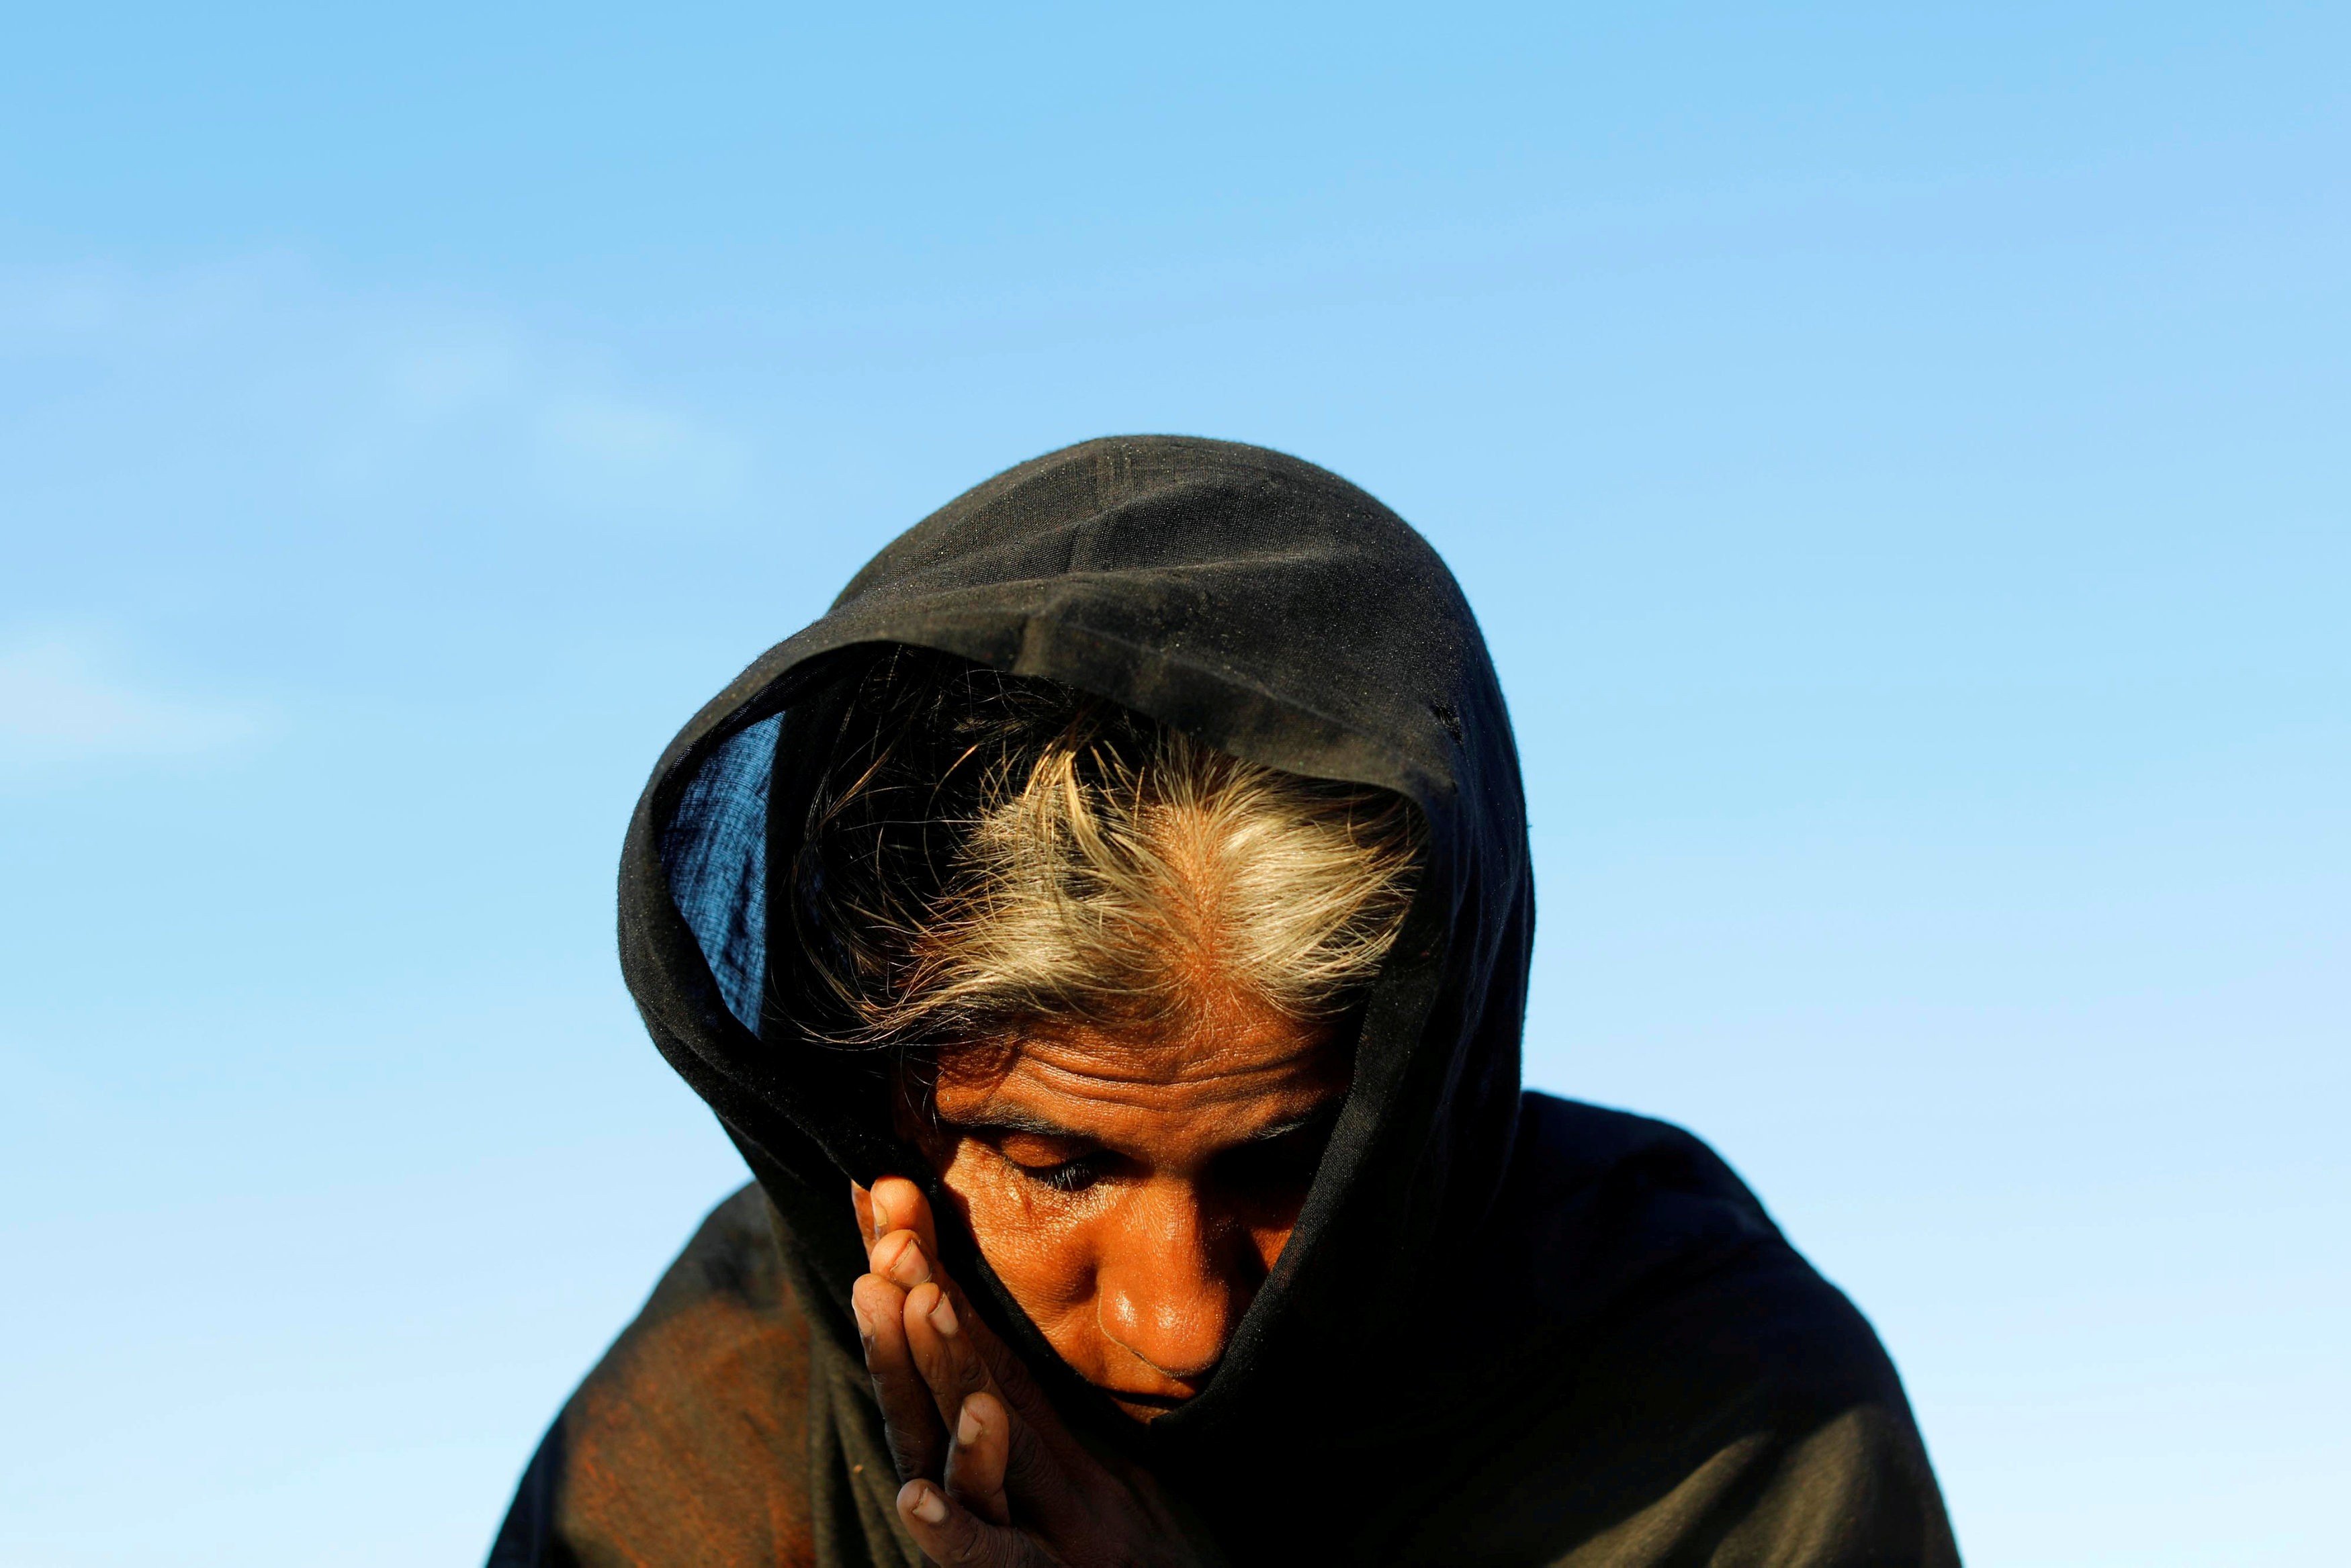 A Rohingya refugee woman waits for permission from the Bangladeshi army to continue, after crossing from Myanmar into Teknaf, Bangladesh, on October 15. Photo: Reuters